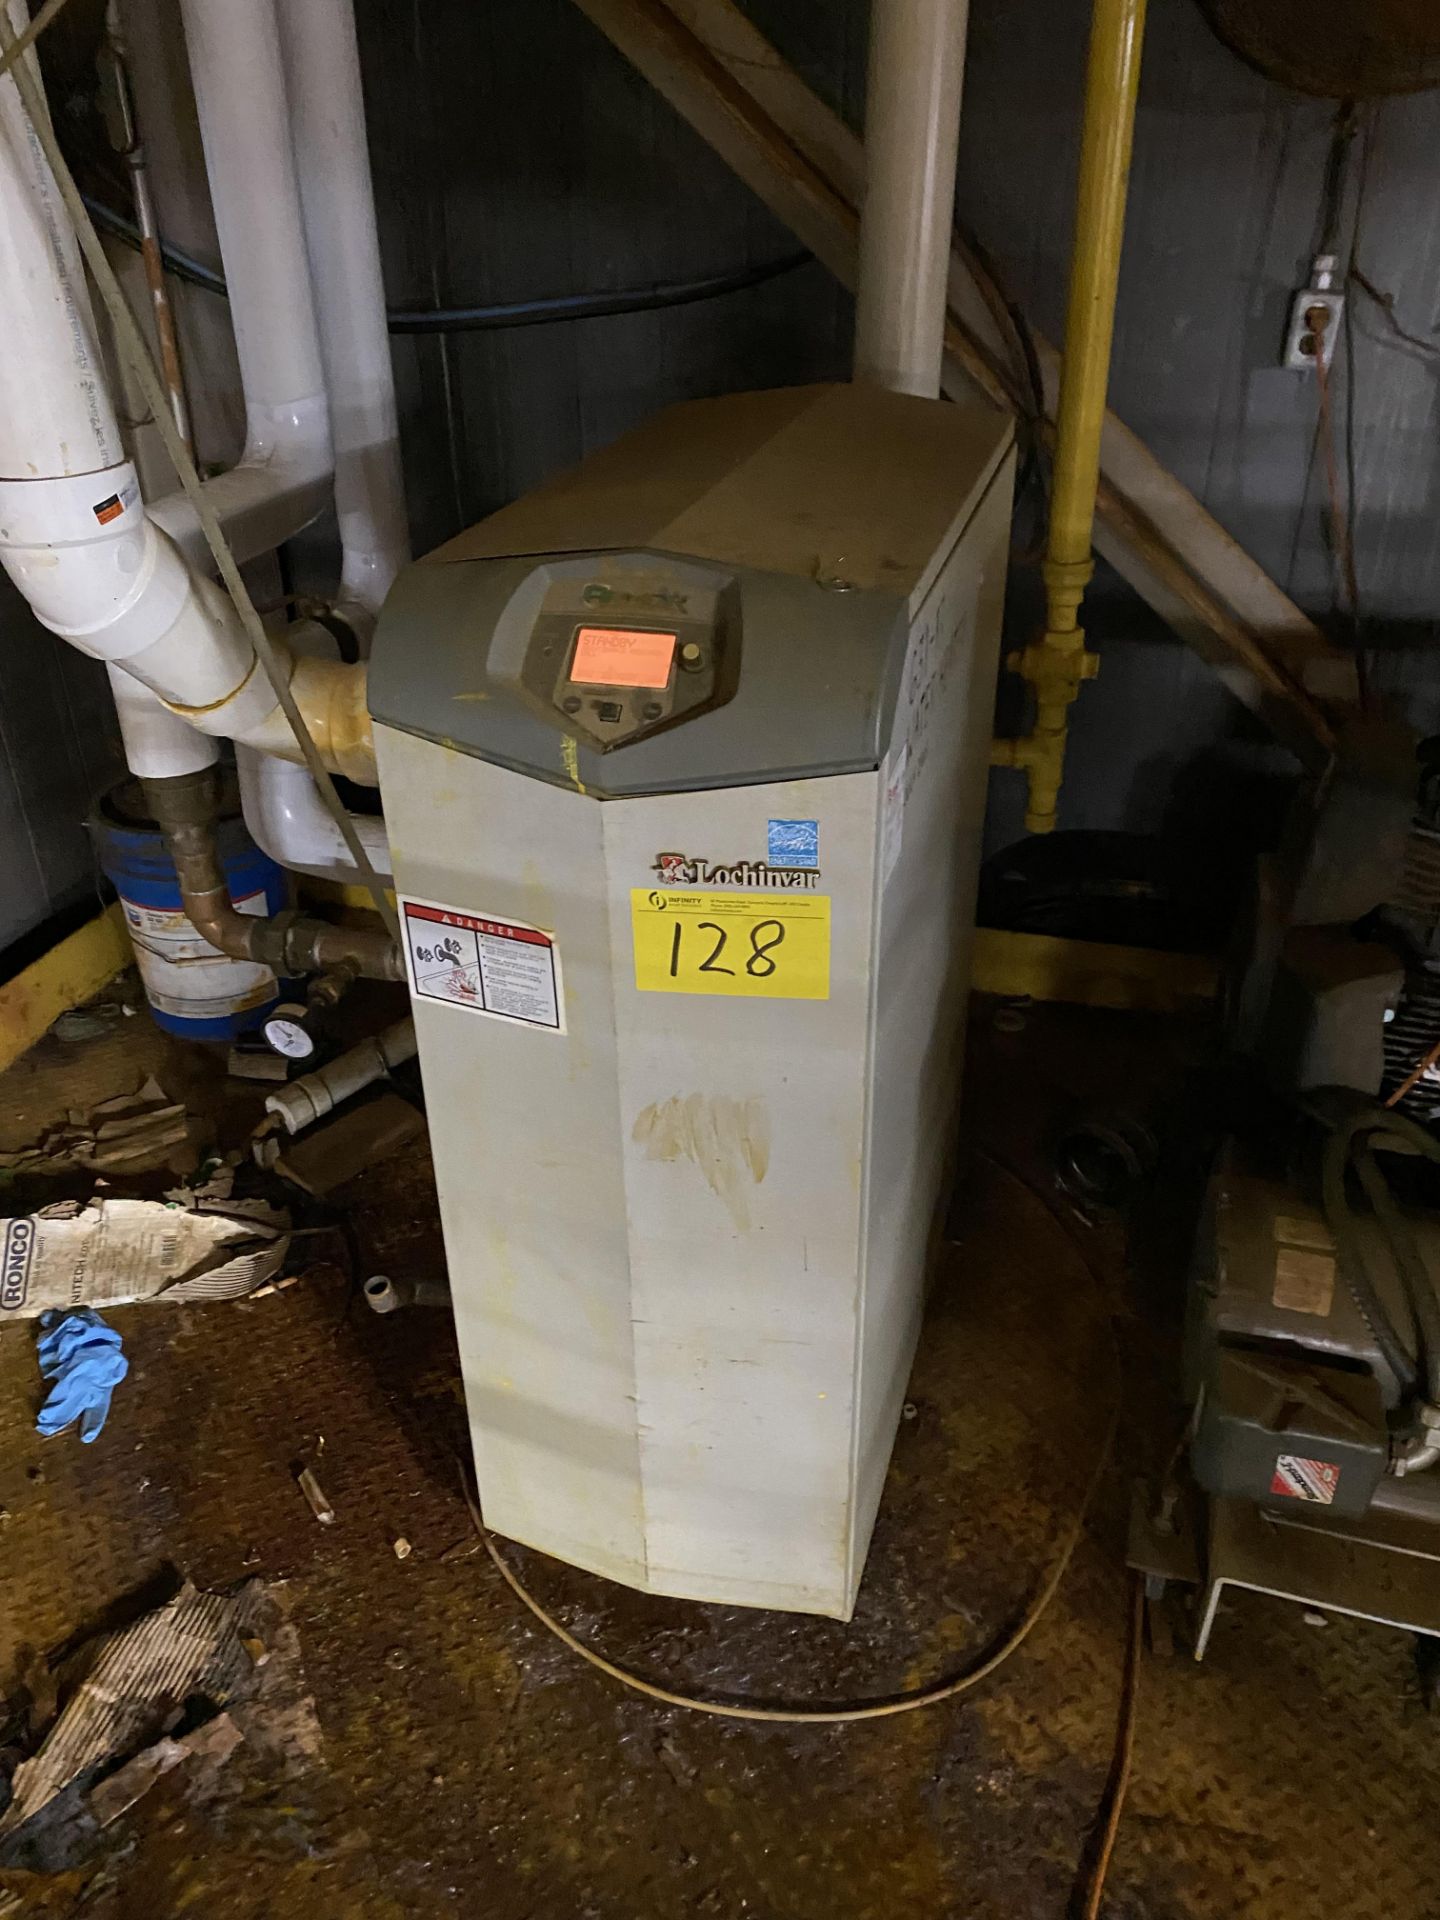 ARMORE CONDENSING WATER HEAER MODEL AWN501PM, LOCHINVER DIGITAL WATER HEATER (GAS POWERED), 500,